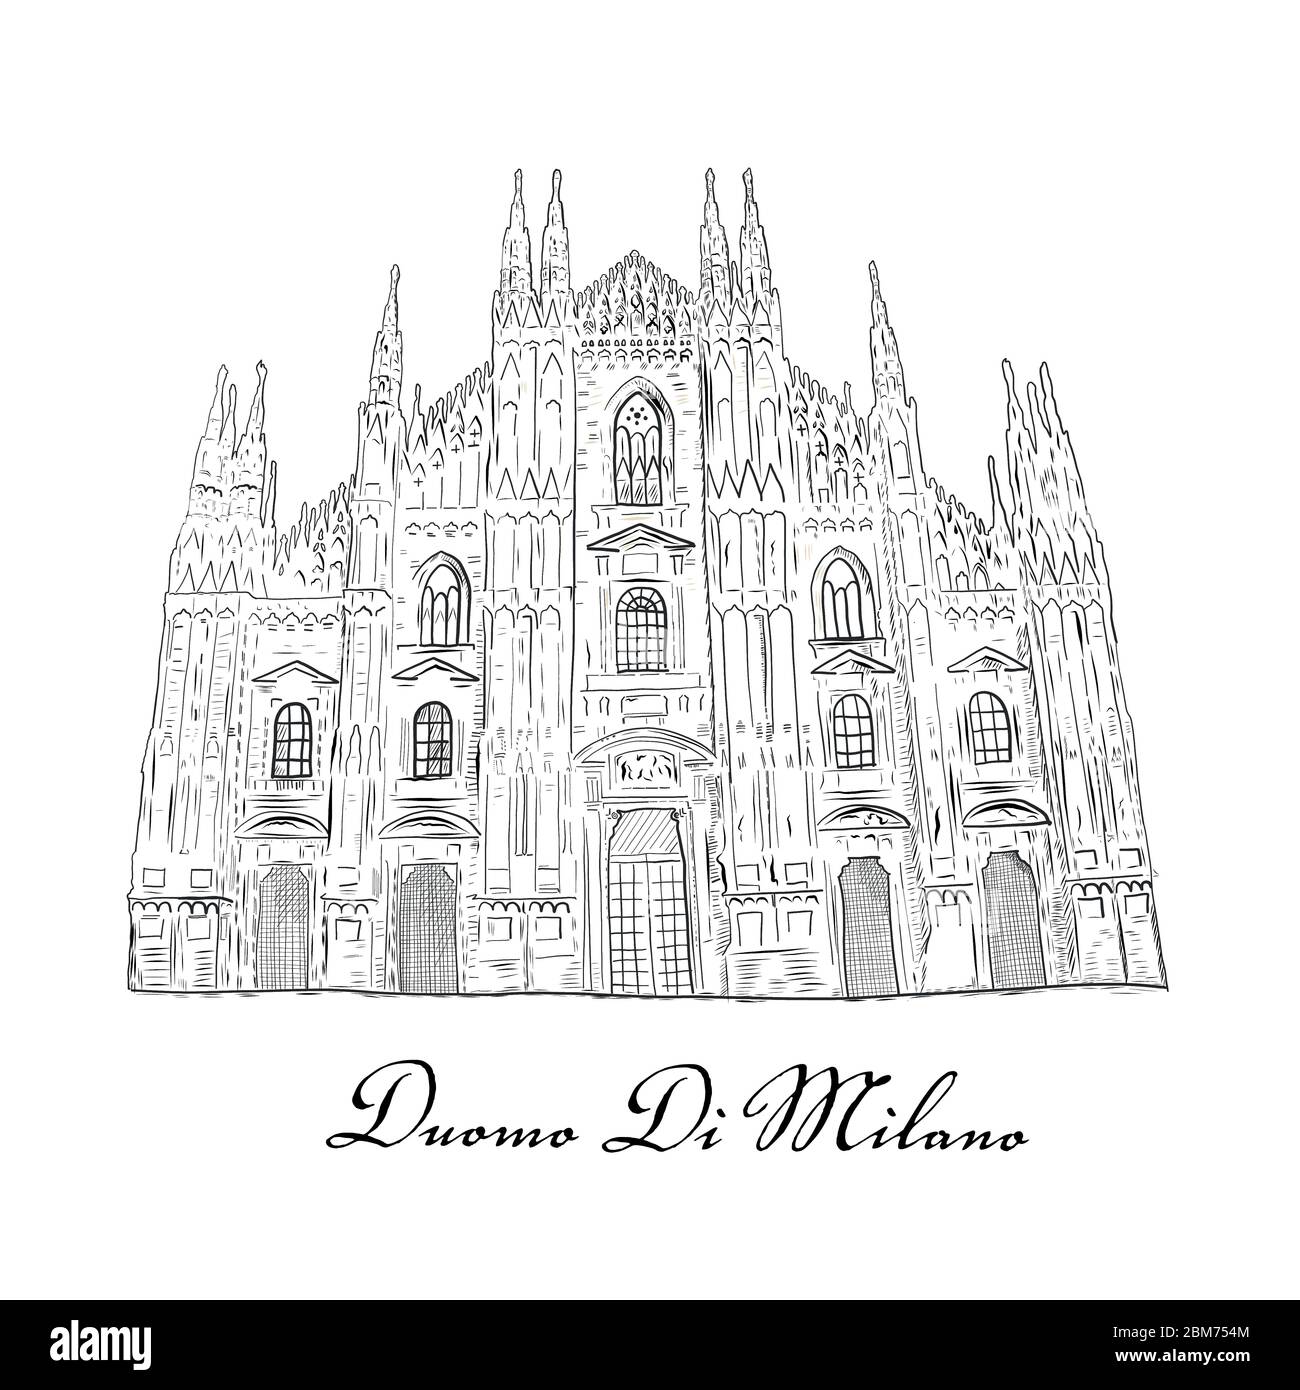 Milan, Italy. Duomo cathedral hand drawn sketch elements Stock Vector